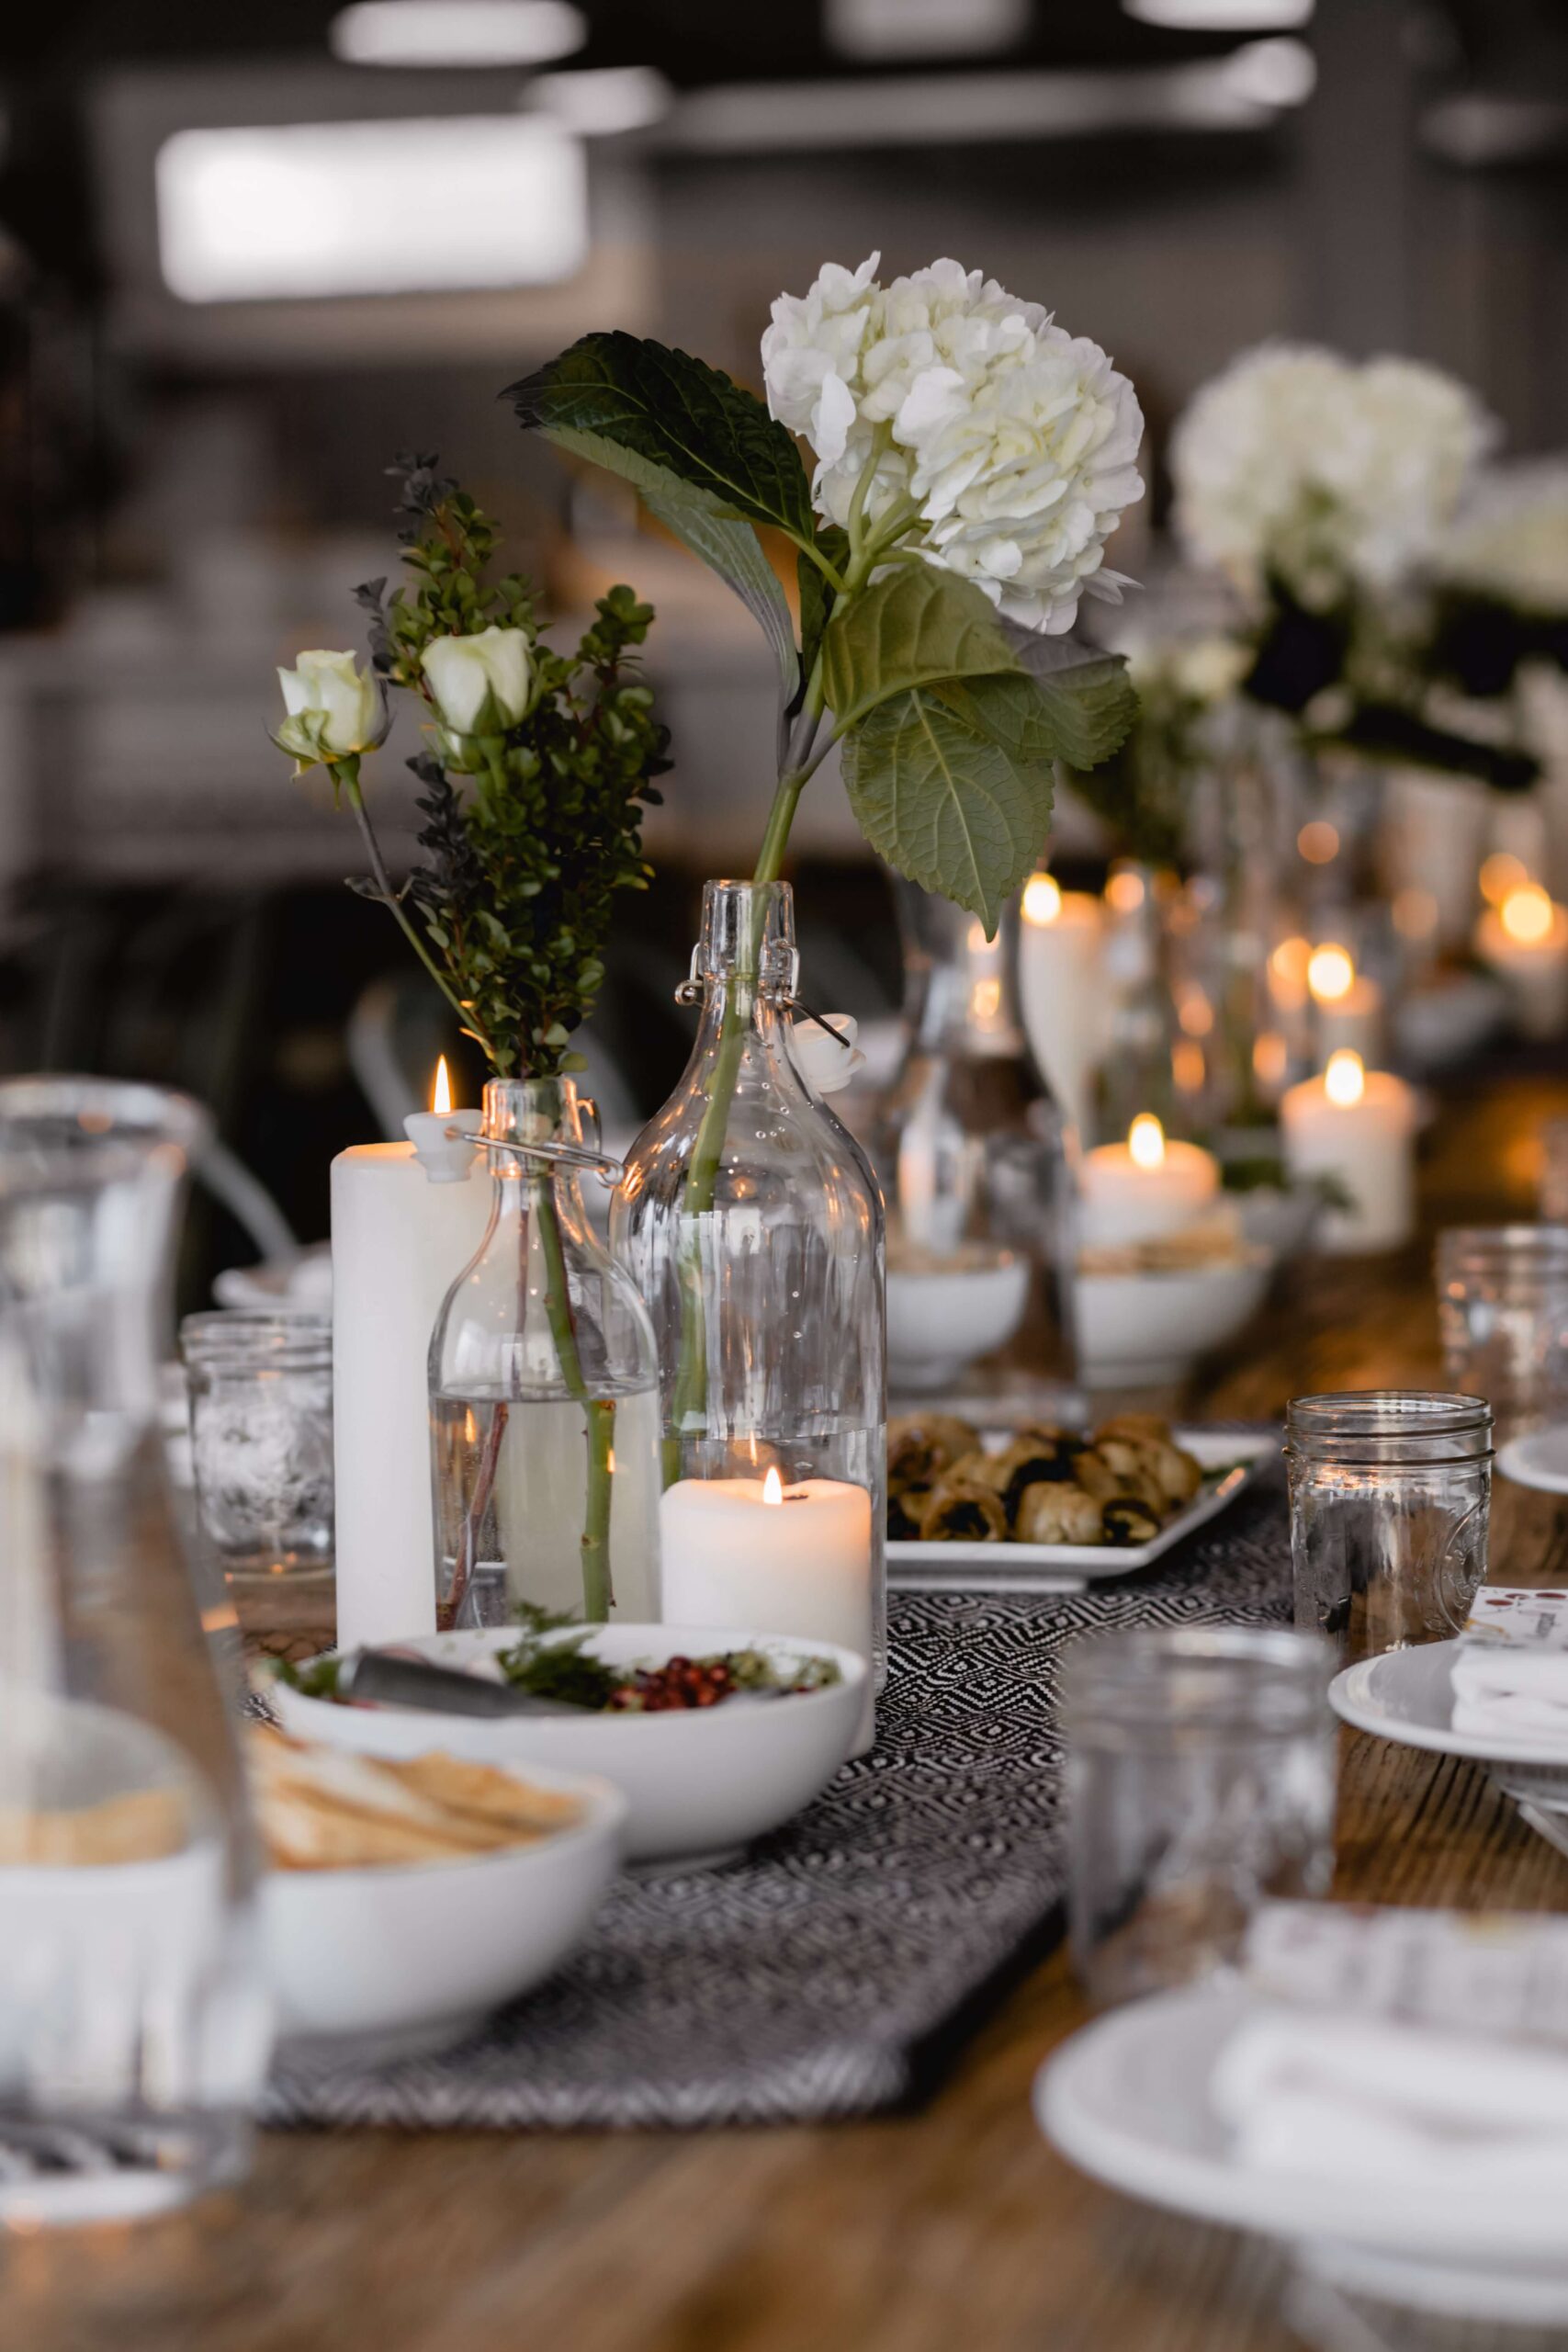 Table set with white plates